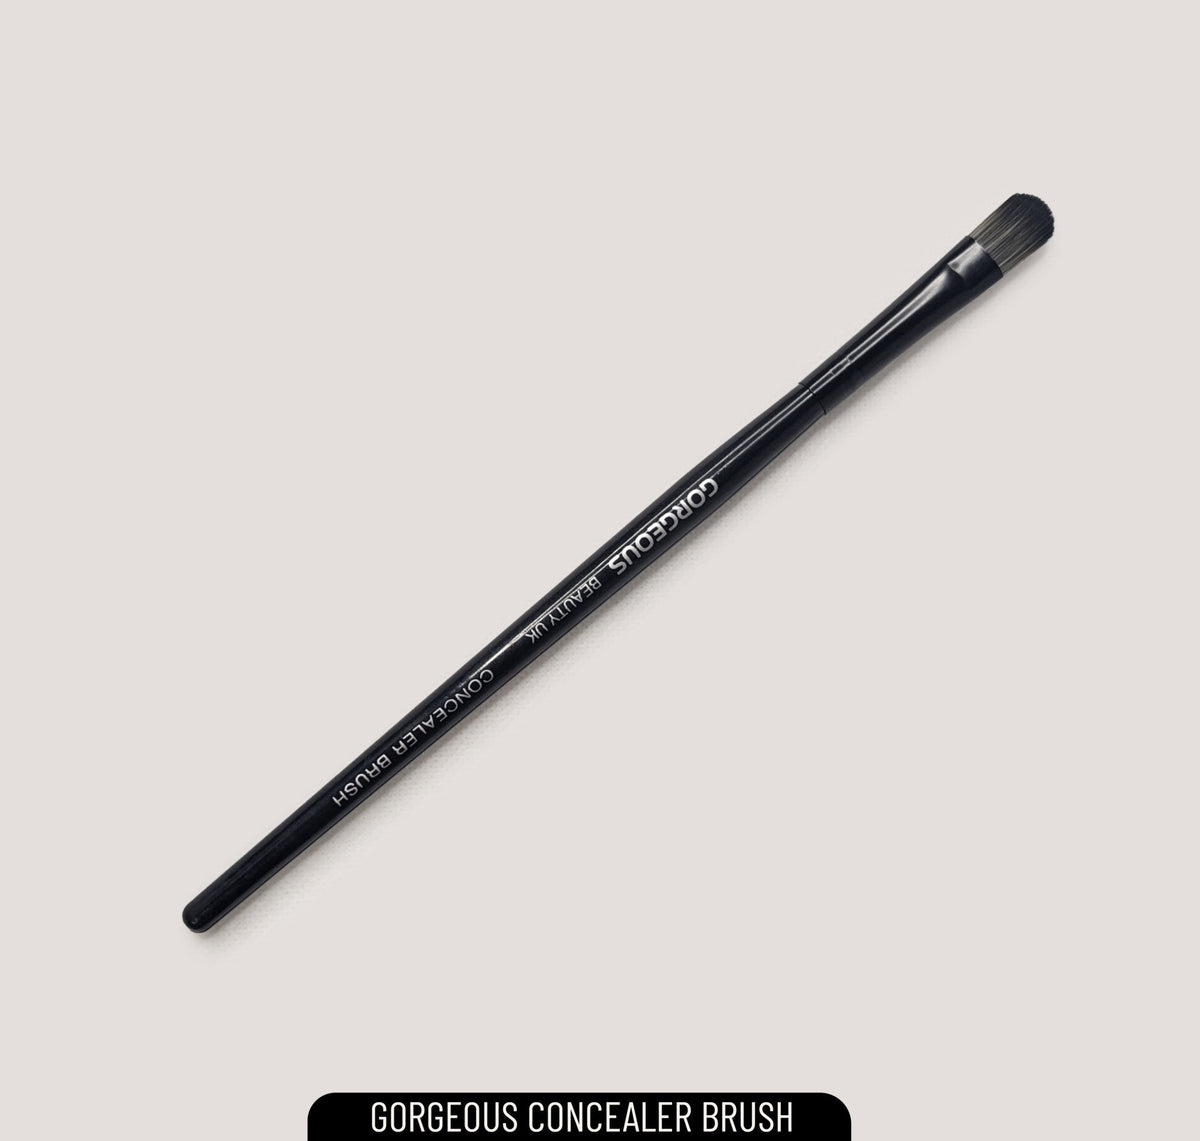 Gorgeous Beauty Concealer Brush - AllurebeautypkGorgeous Beauty Concealer Brush